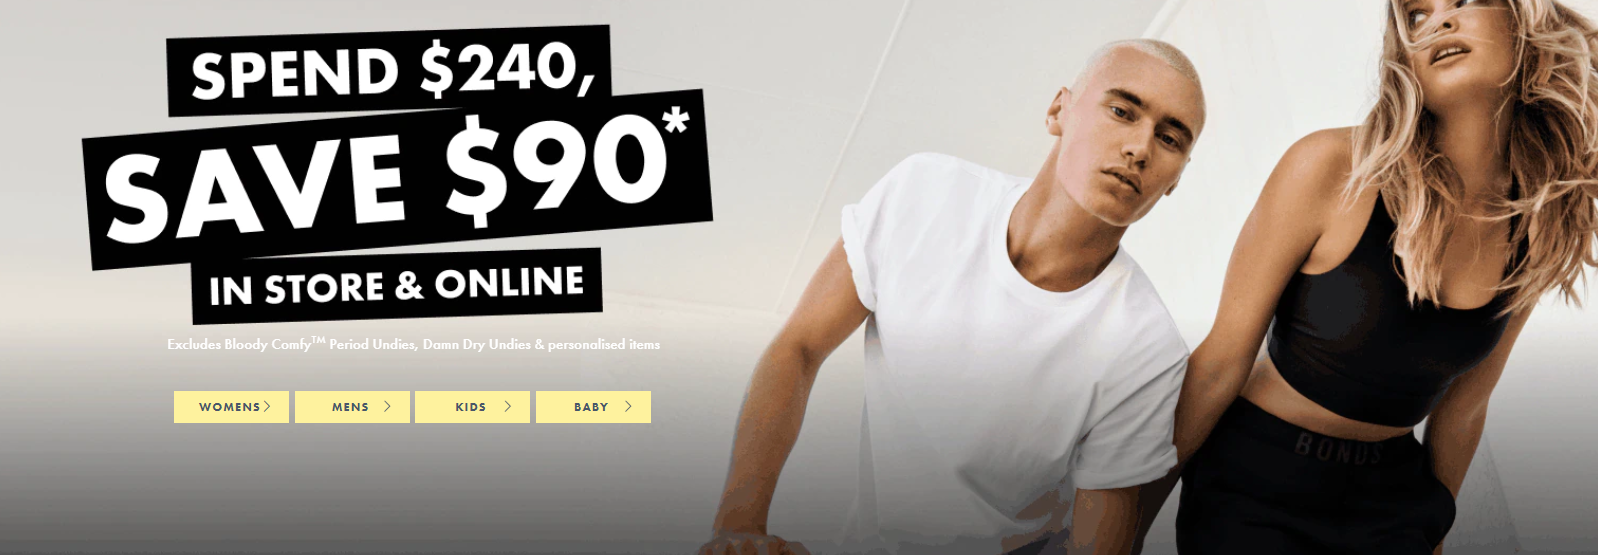 Bonds Spend and save up to $90 OFF online and in-store